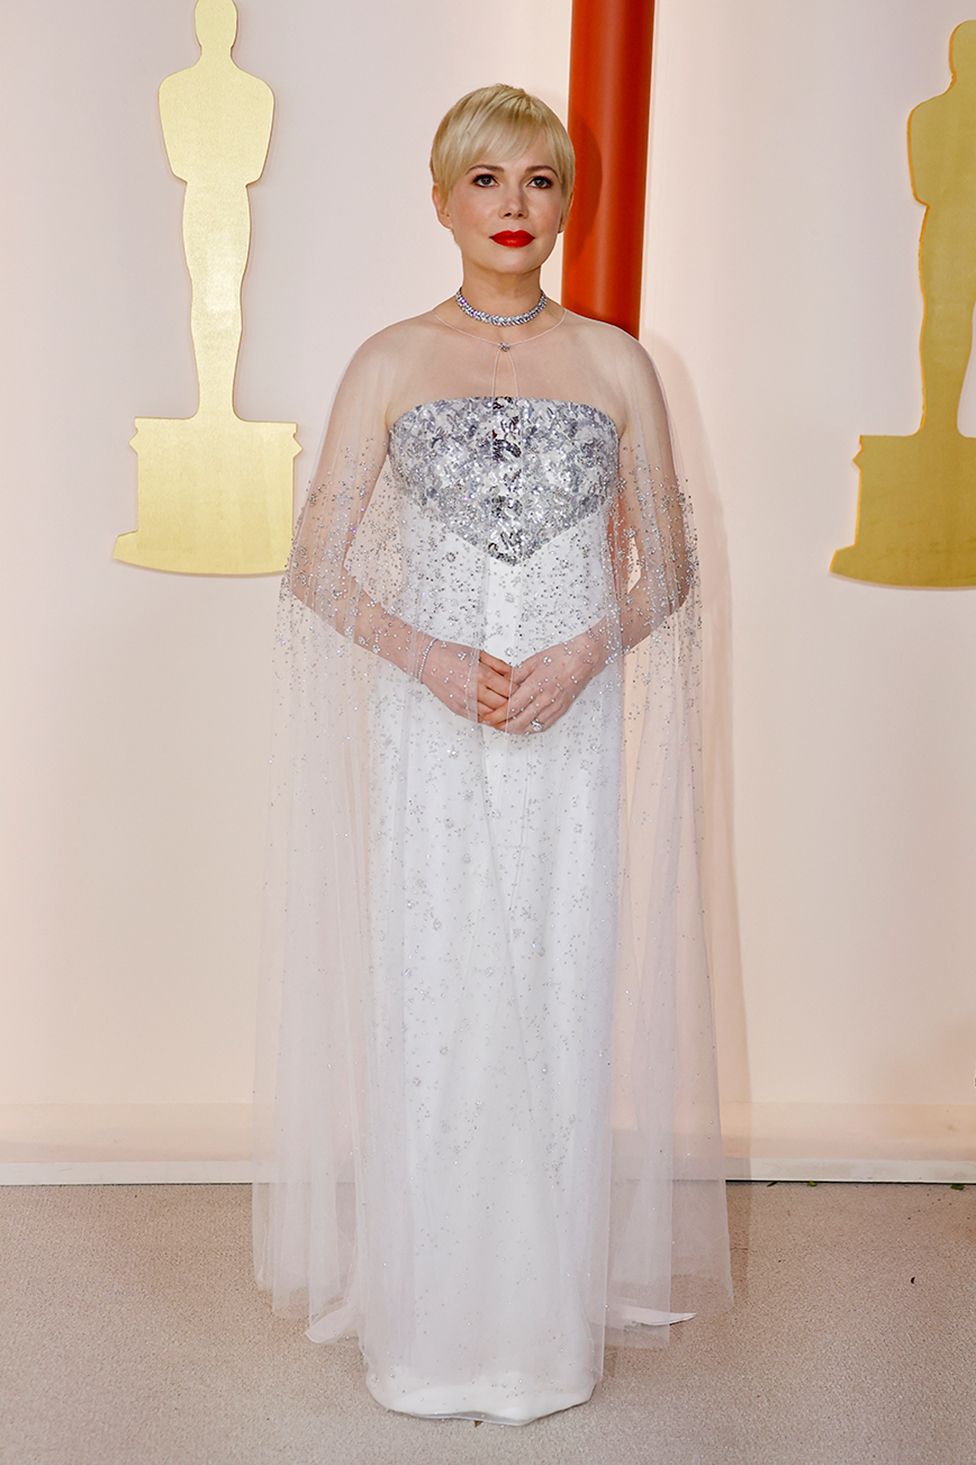 Michelle Williams poses on the champagne-colored red carpet during the Oscars arrivals at the 95th Academy Awards in Hollywood, Los Angeles, California, U.S., March 12, 2023